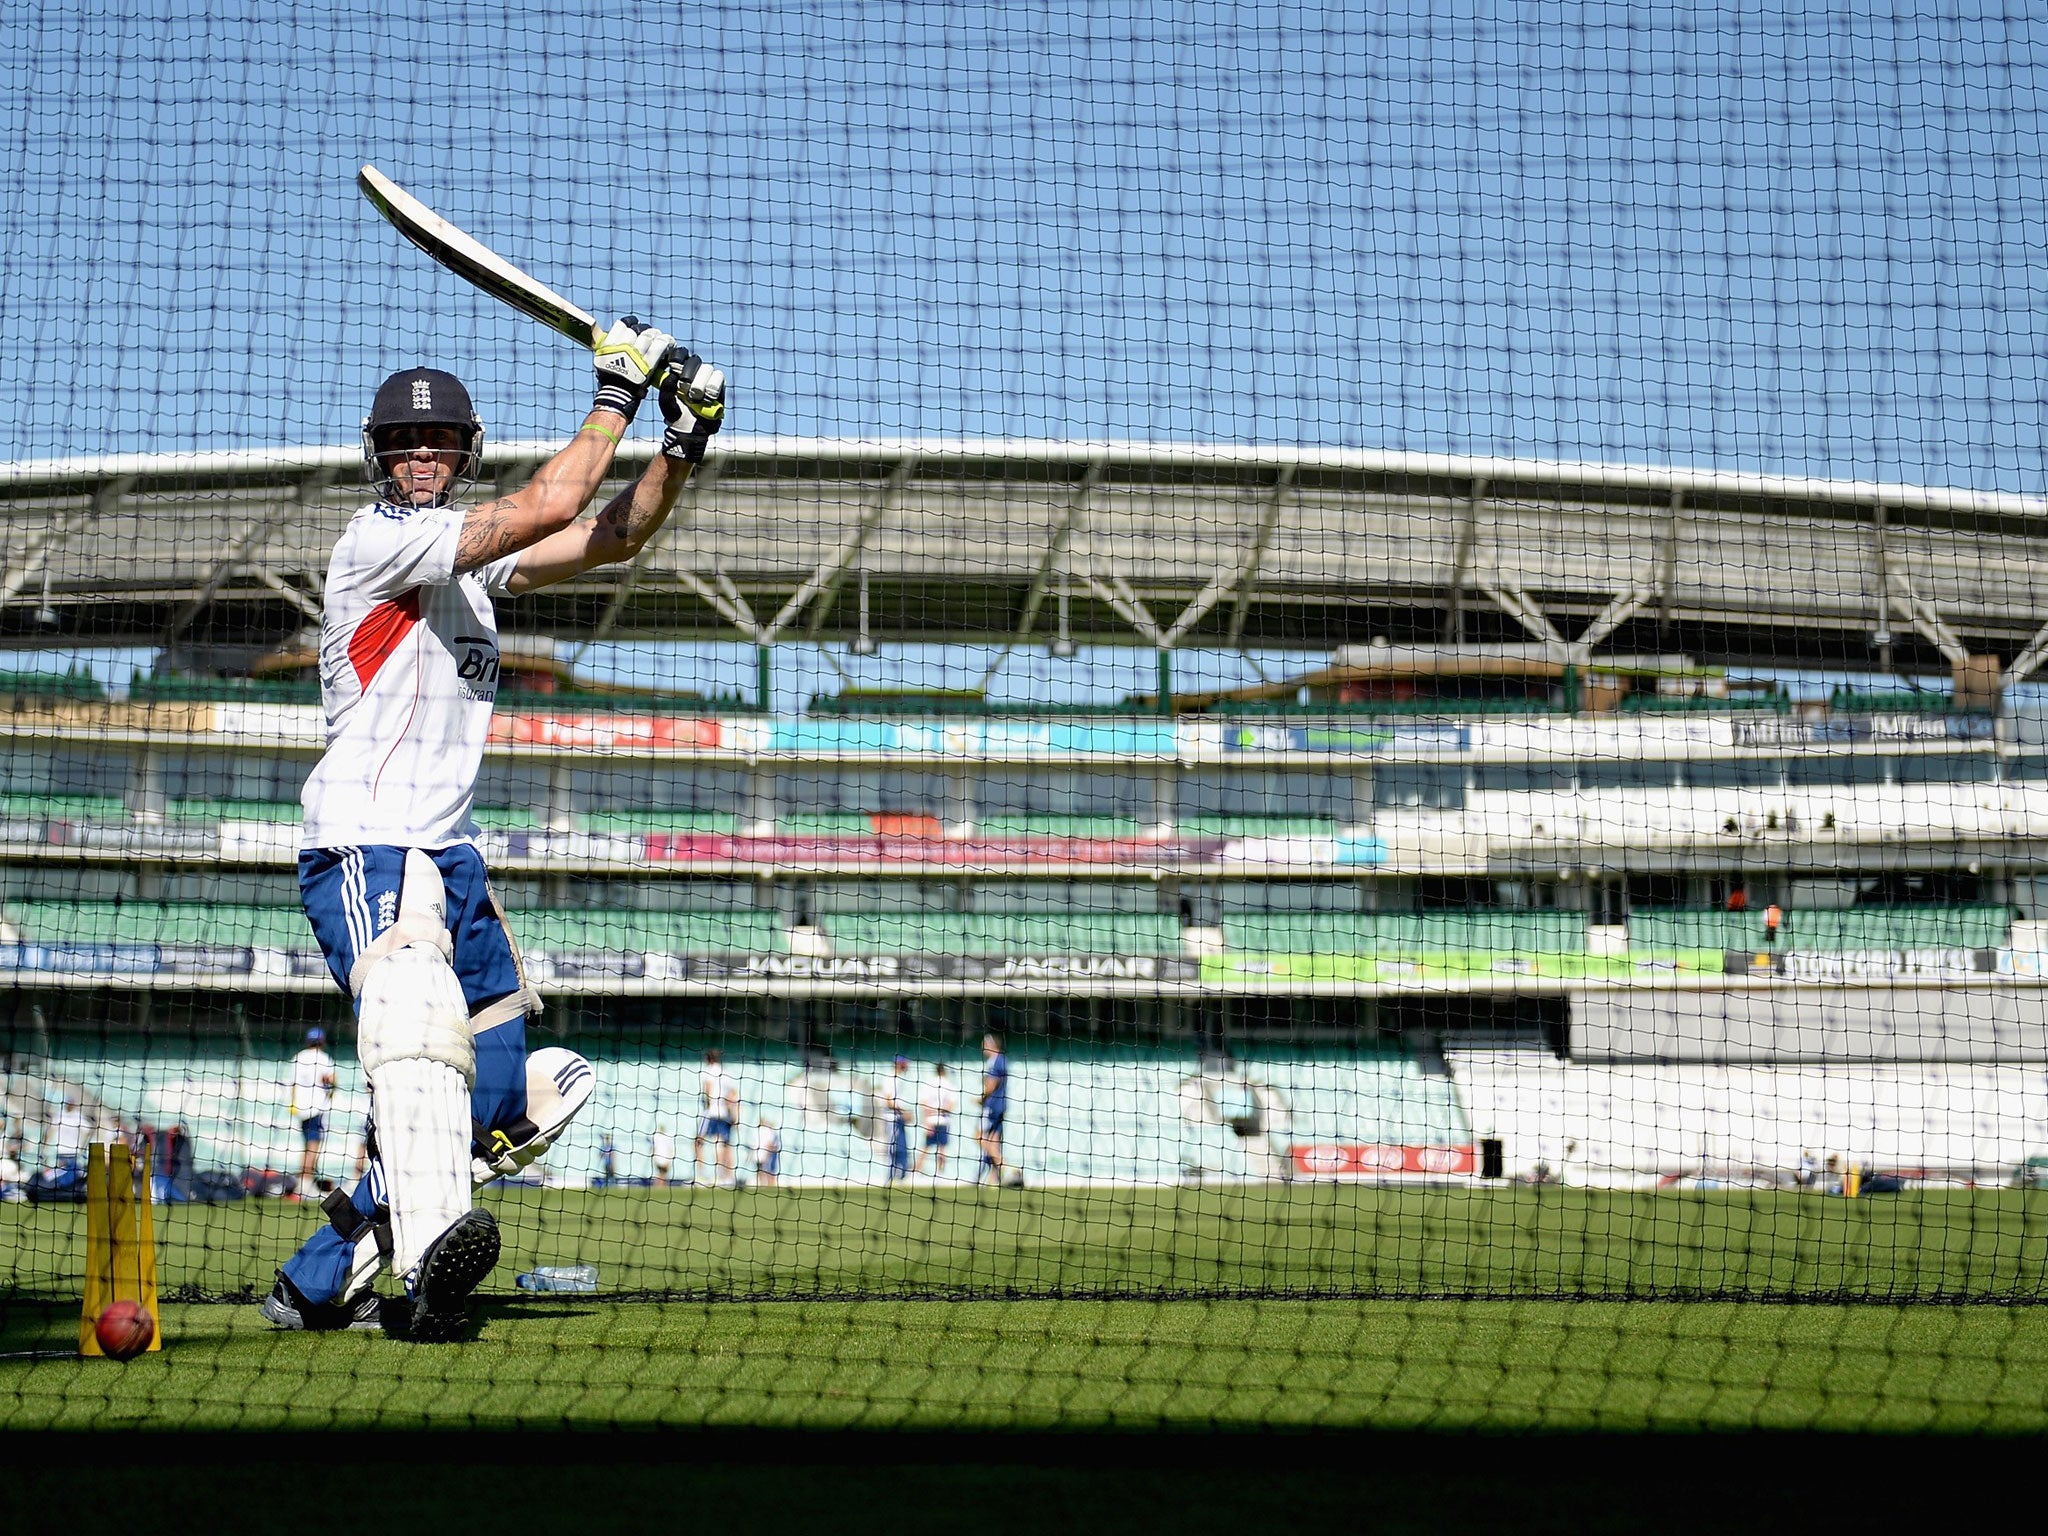 Kevin Pietersen bats in the nets at The Oval ahead of today's final Ashes Test